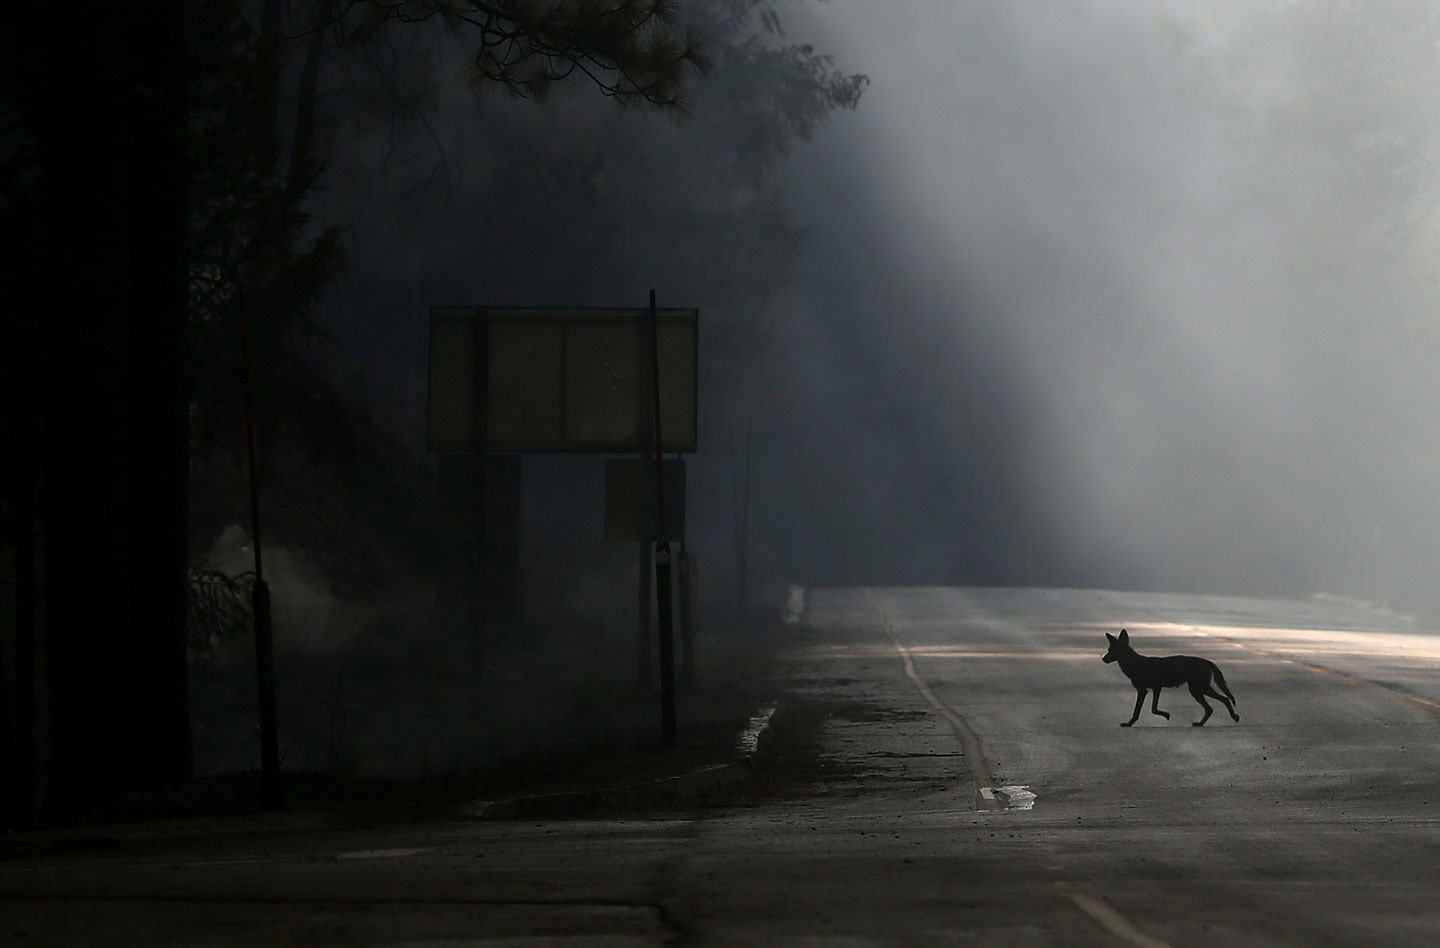 GROVELAND, CA - AUGUST 23:  A coyote walks across U.S. Highway 120, shut down due to the Rim Fire on August 23, 2013 near Groveland, California. The Rim Fire continues to burn out of control and threatens 4,500 homes outside of Yosemite National Park. Over 2,000 firefighters are battling the blaze that entered a section of Yosemite National Park overnight and is only 2 percent contained.  (Photo by Justin Sullivan/Getty Images)